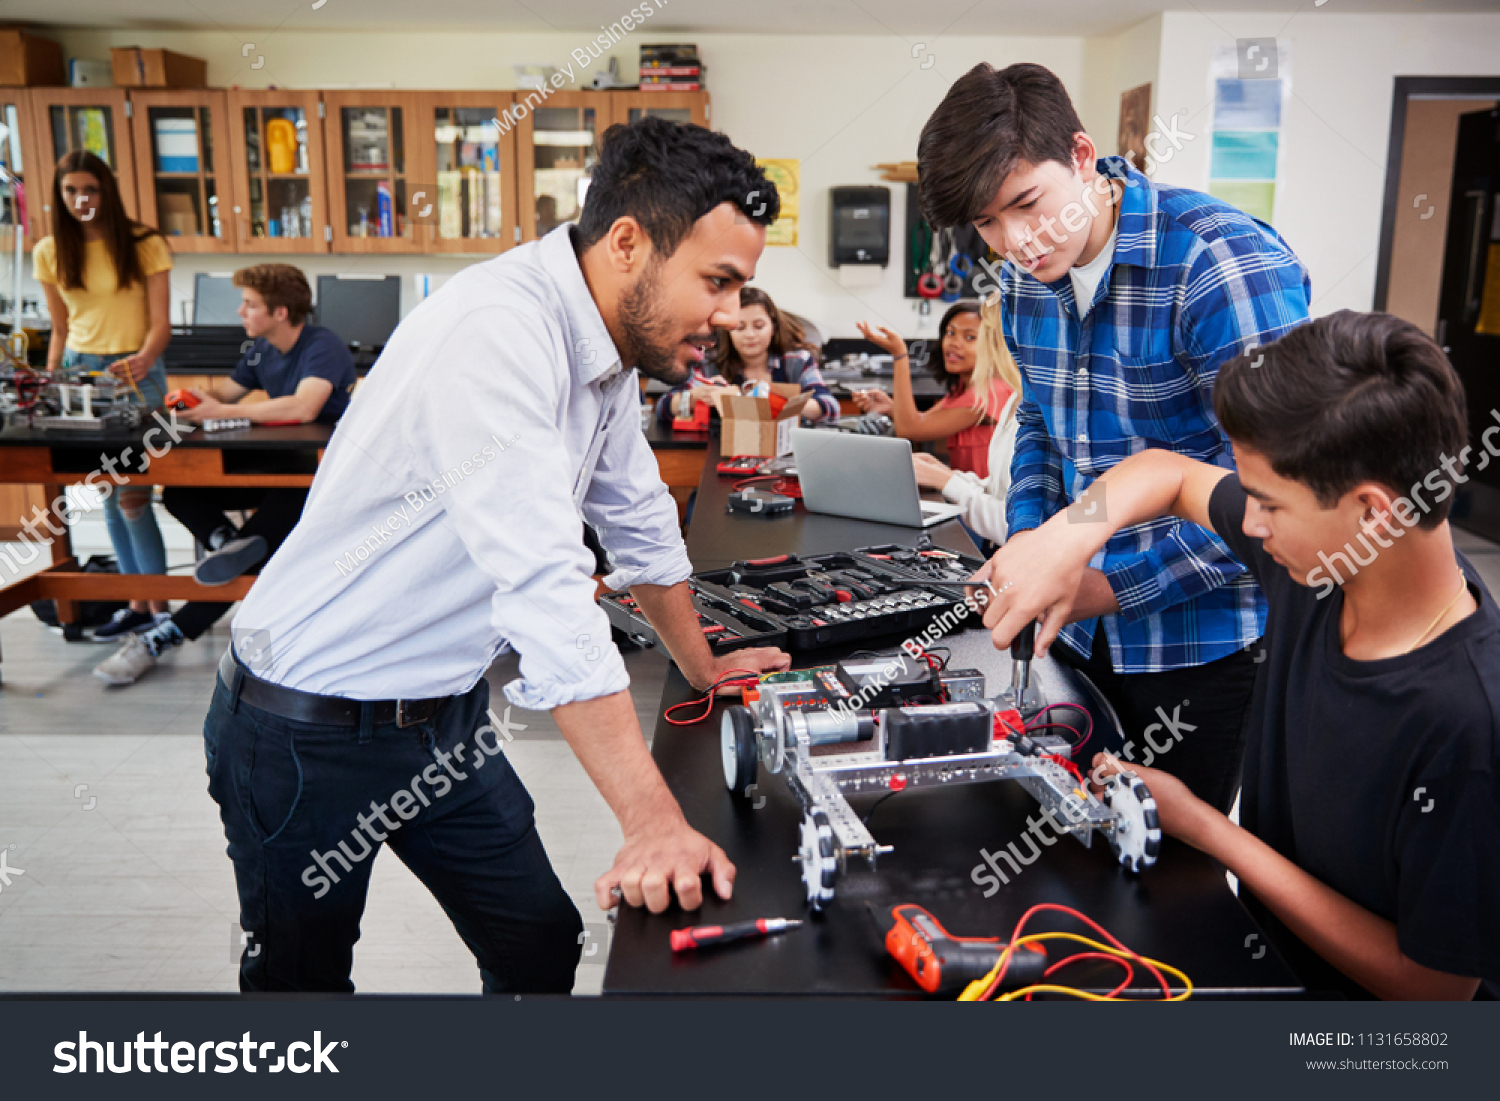 Teacher With Male Pupils Building Robotic Vehicle In Science Lesson #1131658802